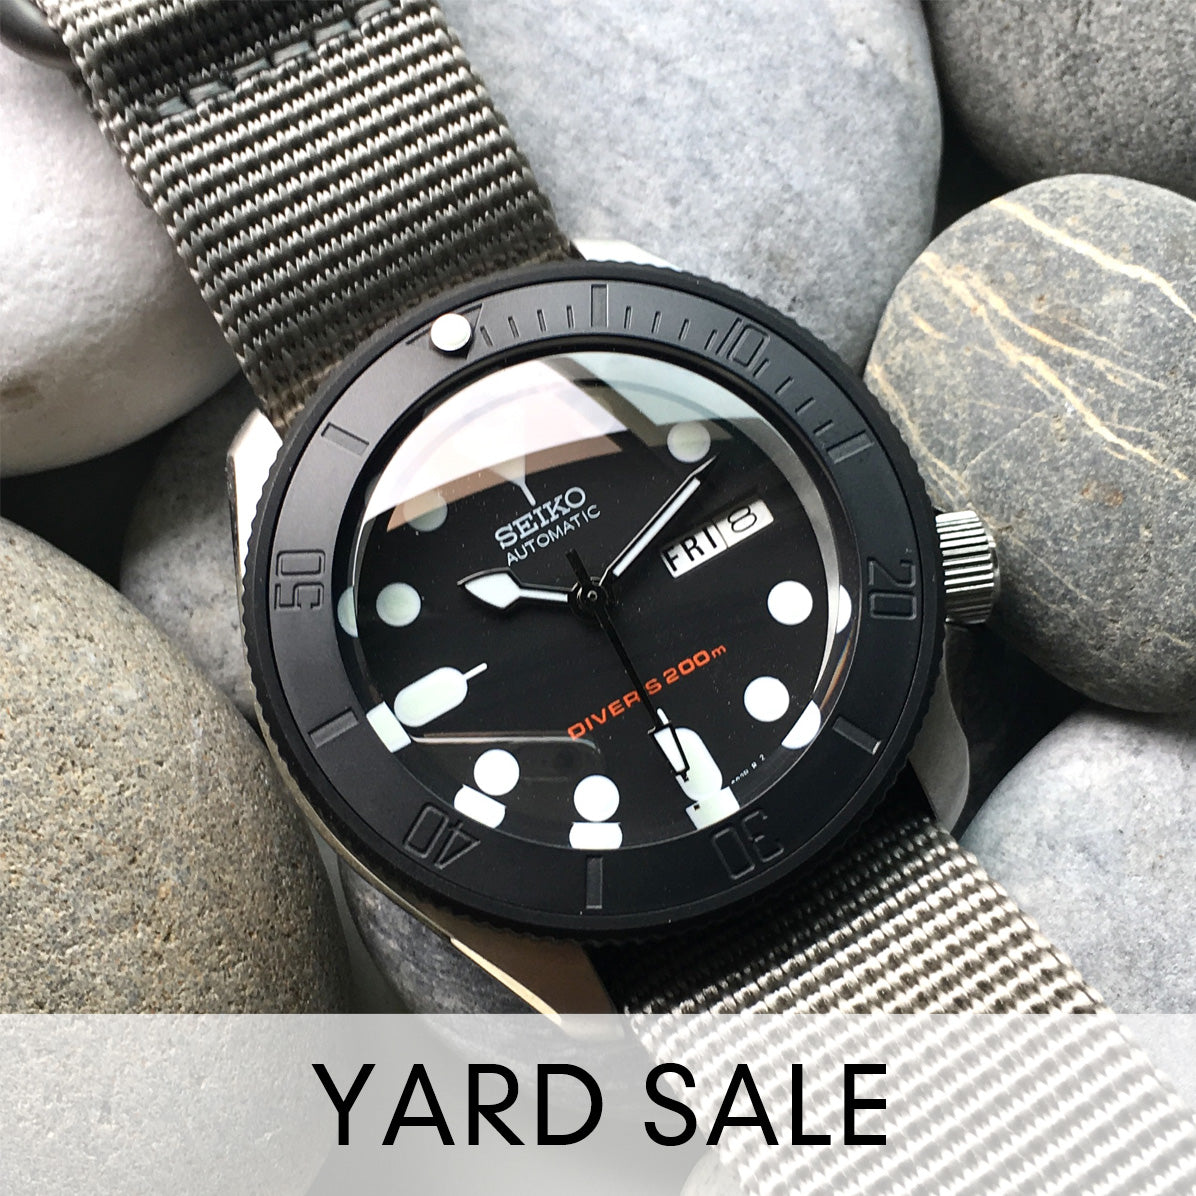 YARD SALE Tagged Bezel Inserts - SKX007 & SRPD (SLOPE) - DLW WATCHES